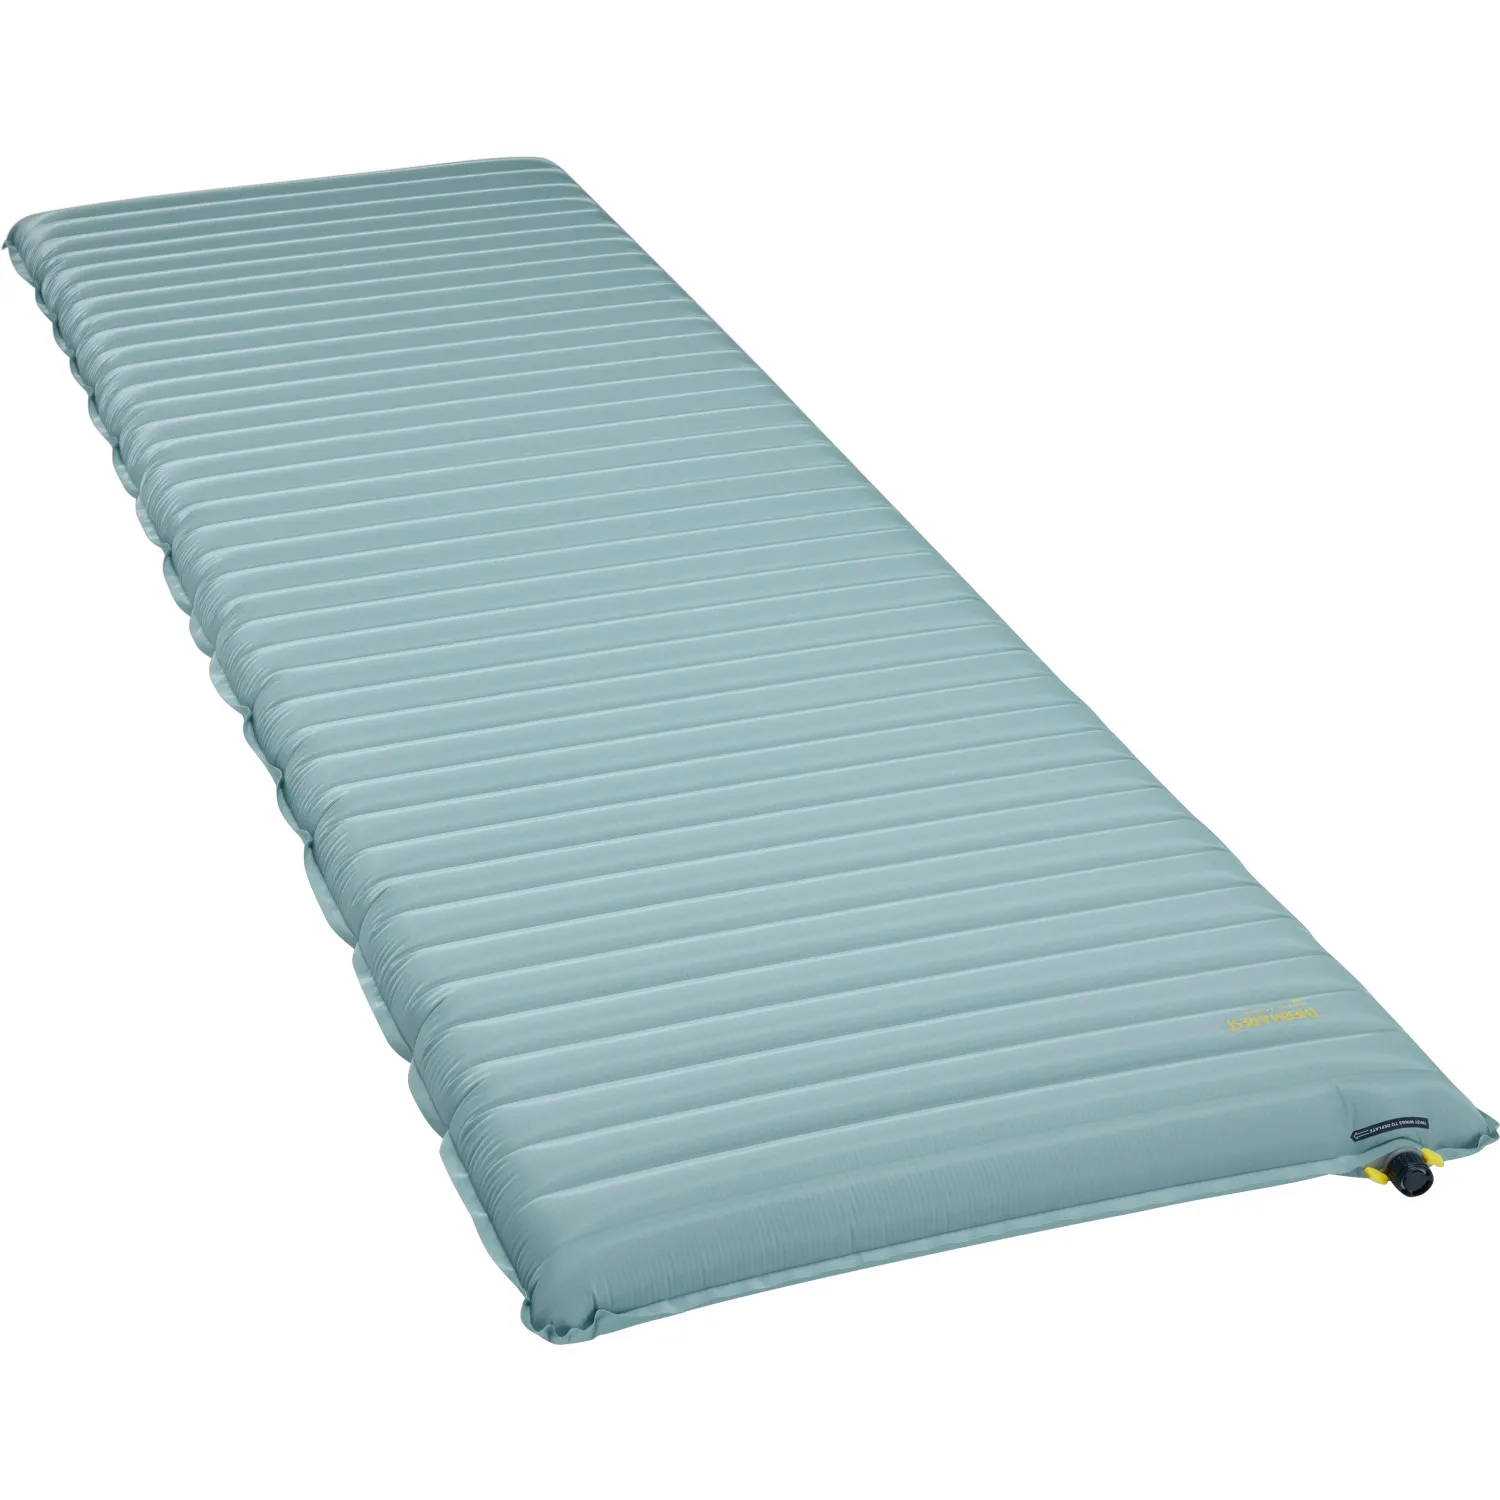 01_11636_thermarest_neoair_xtherm_nxt_max_neptune_regular_wide_angle.jpg